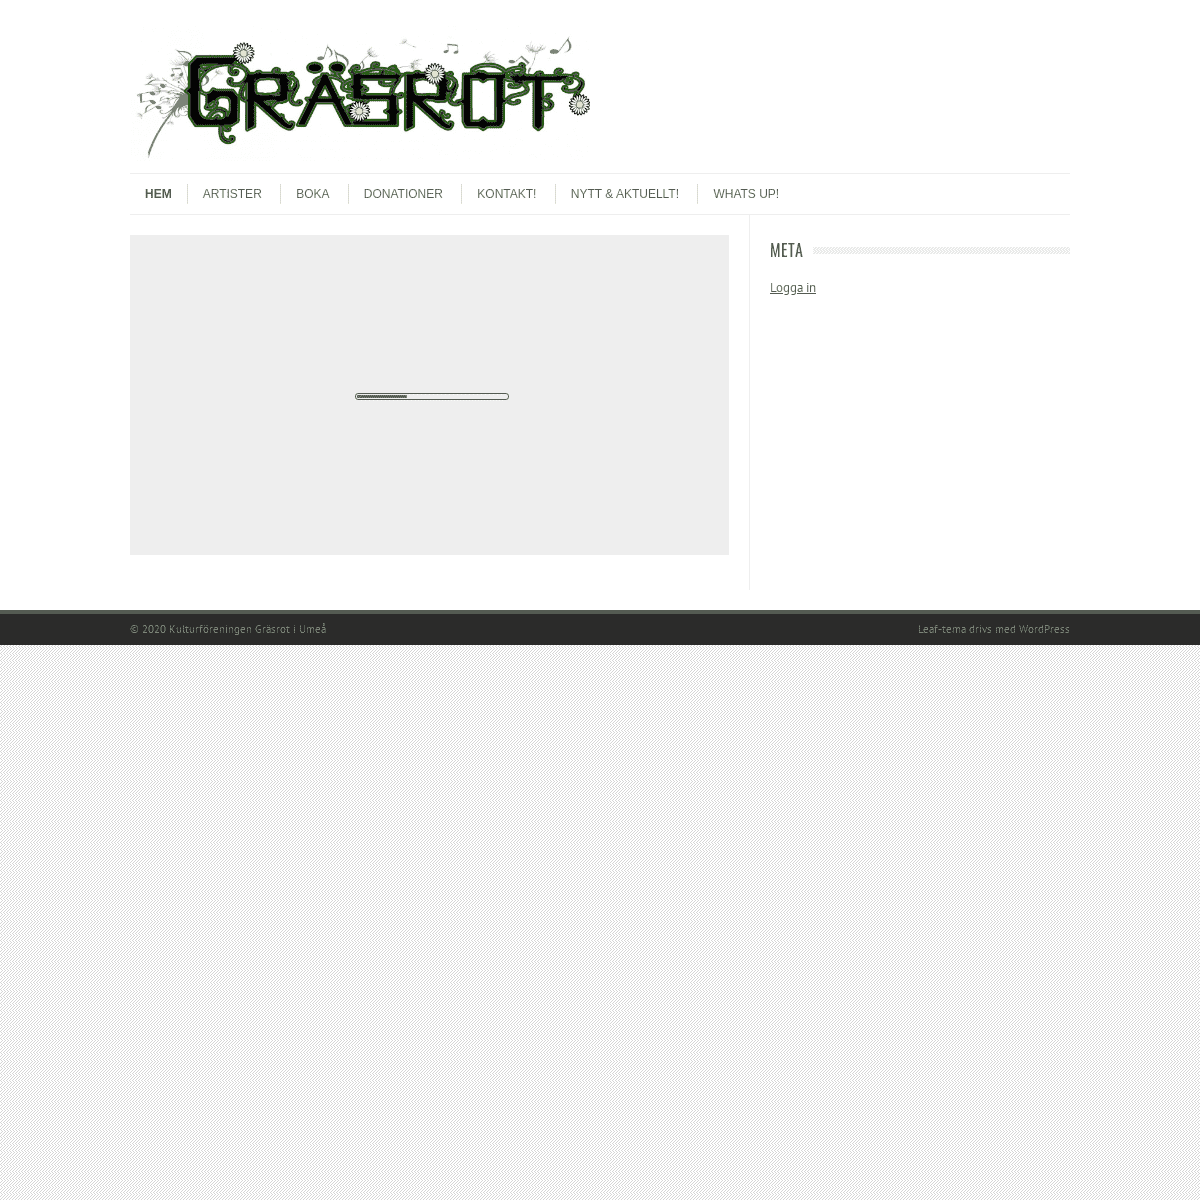 A complete backup of grasrot.org